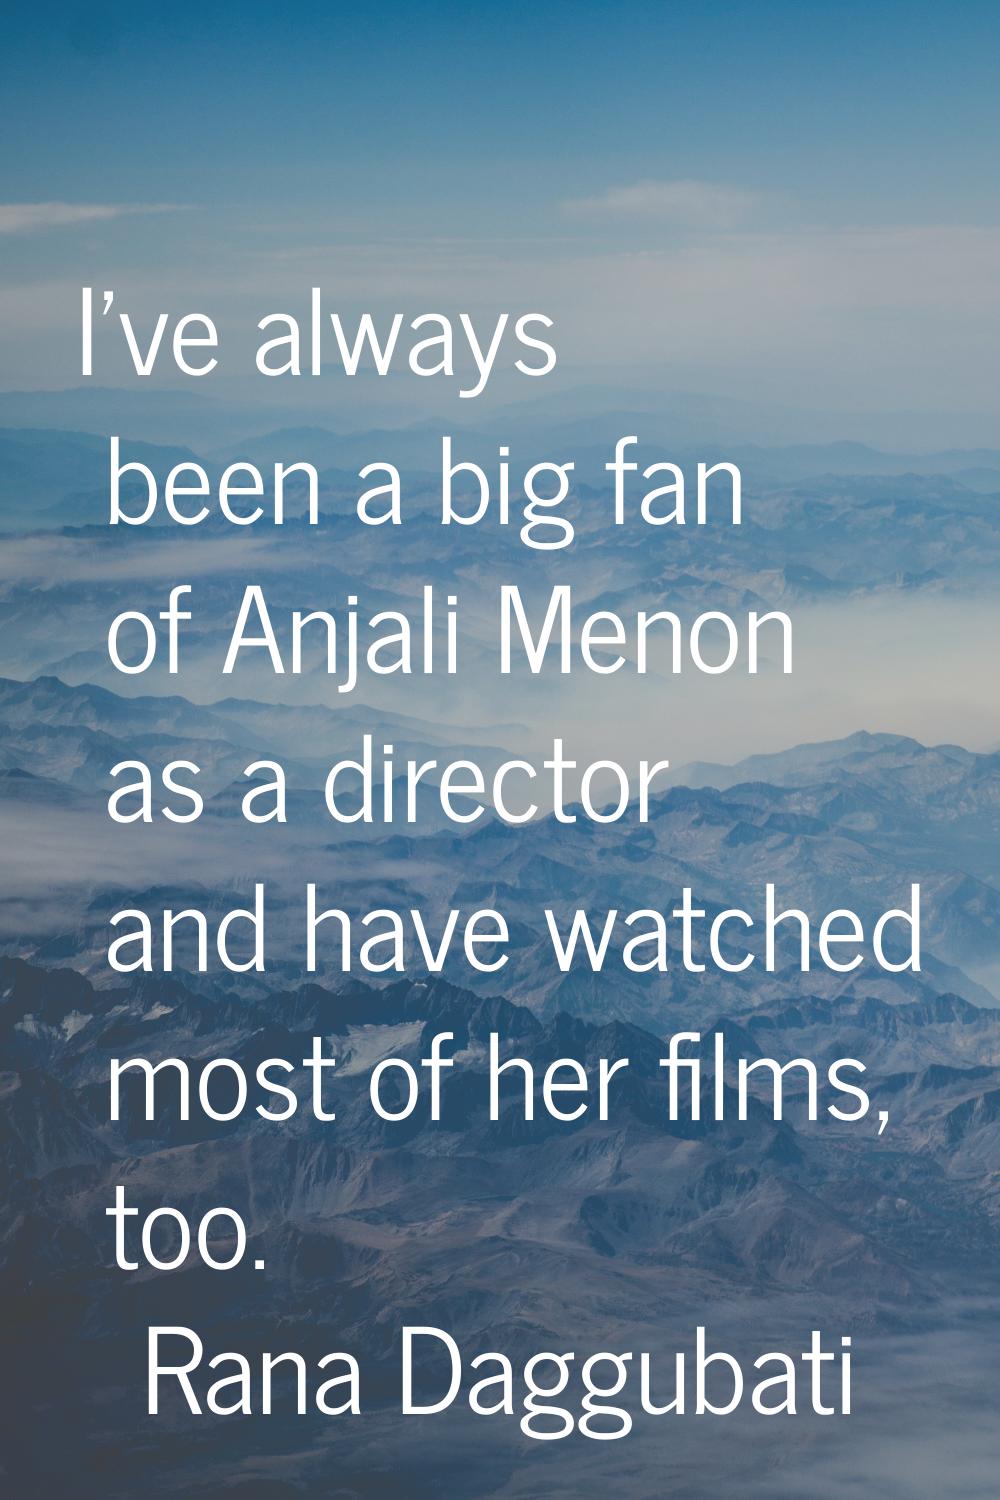 I've always been a big fan of Anjali Menon as a director and have watched most of her films, too.